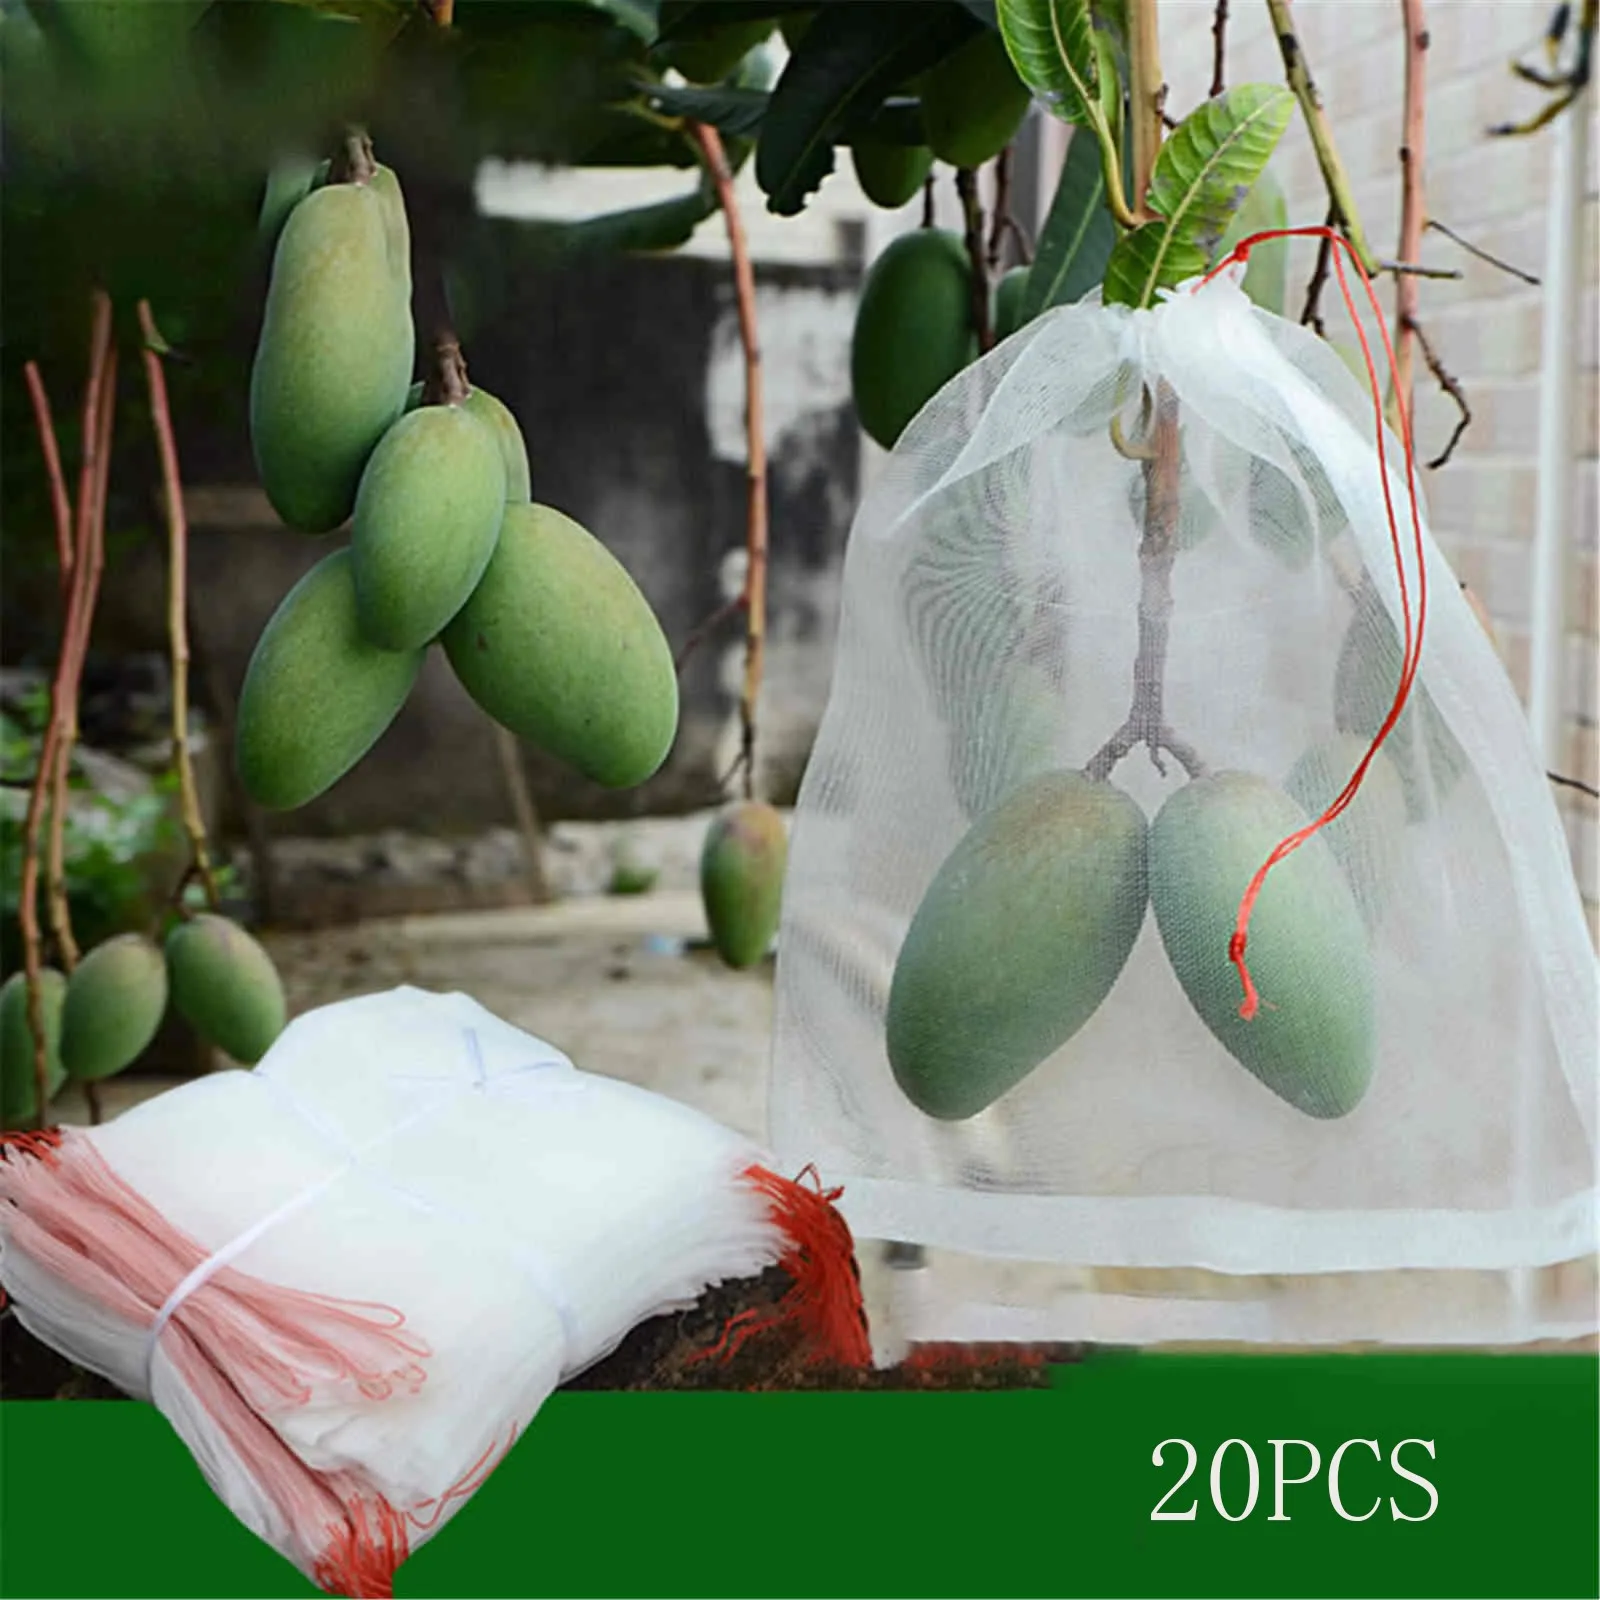 20Pcs Garden Insect Barrier Net Protect Bags Plant Seed Carrier Bag Fruit Bag 